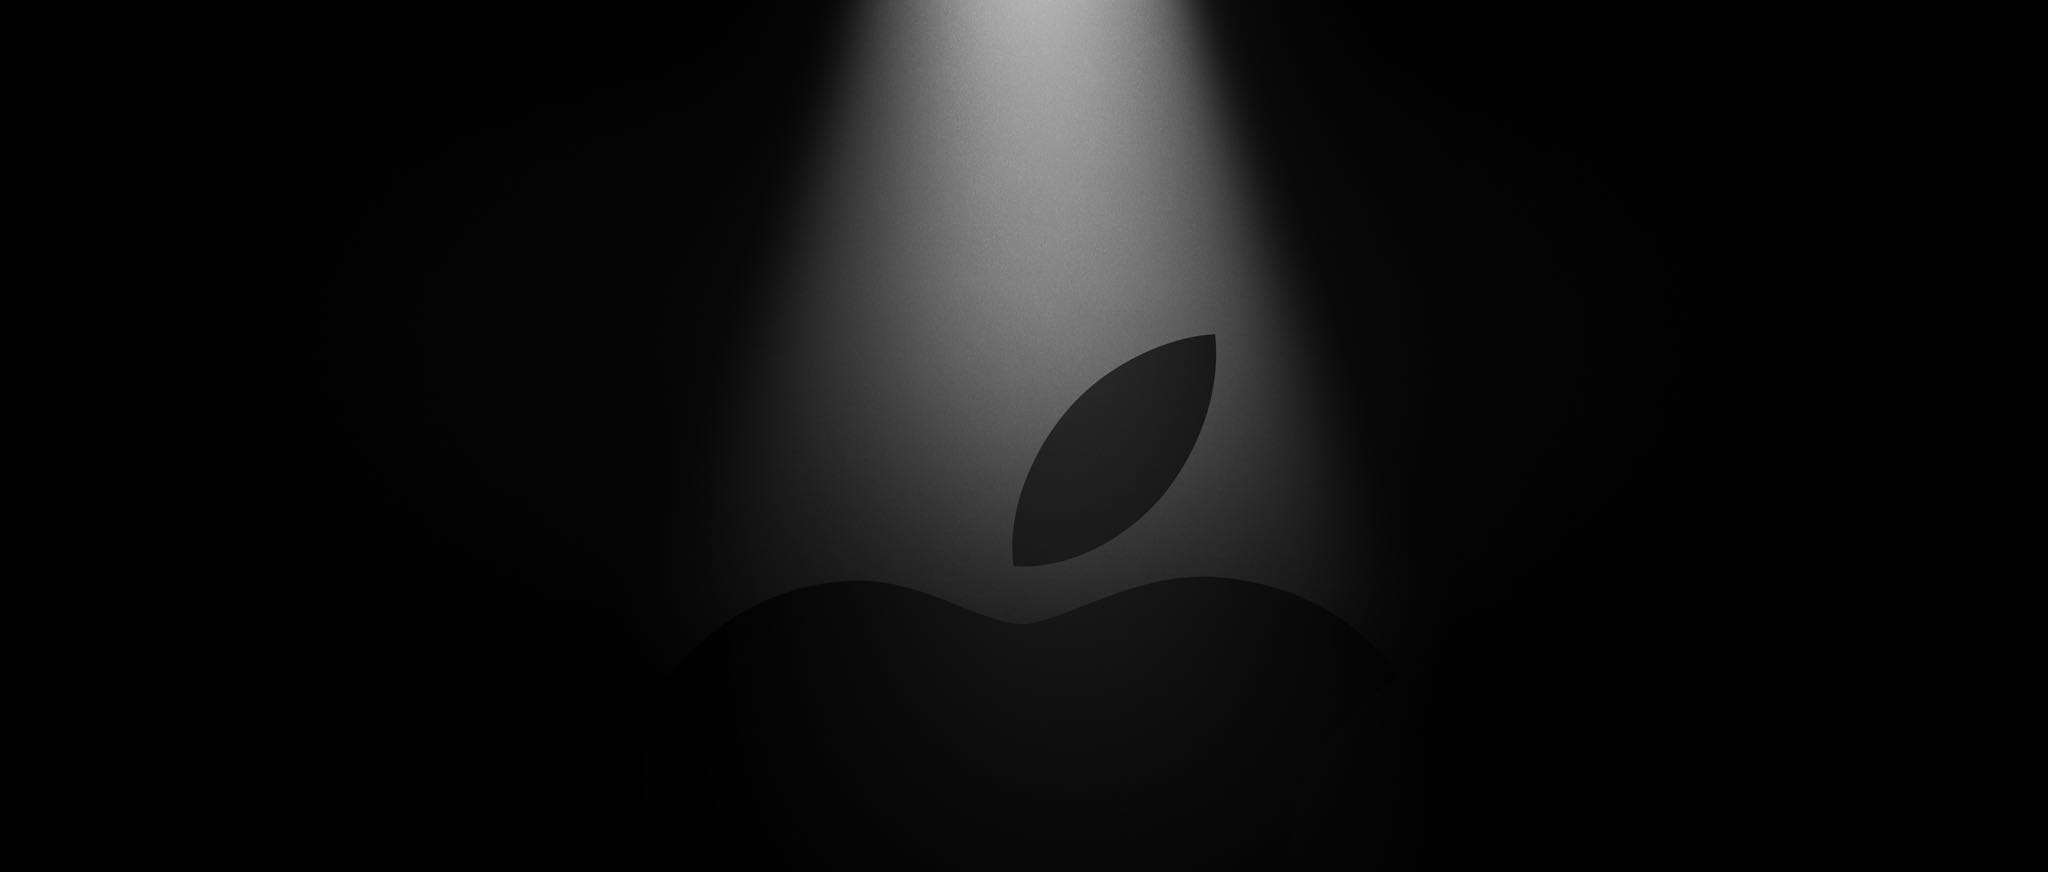 A black Apple logo set against an all-dark background with a spotlight cast from above